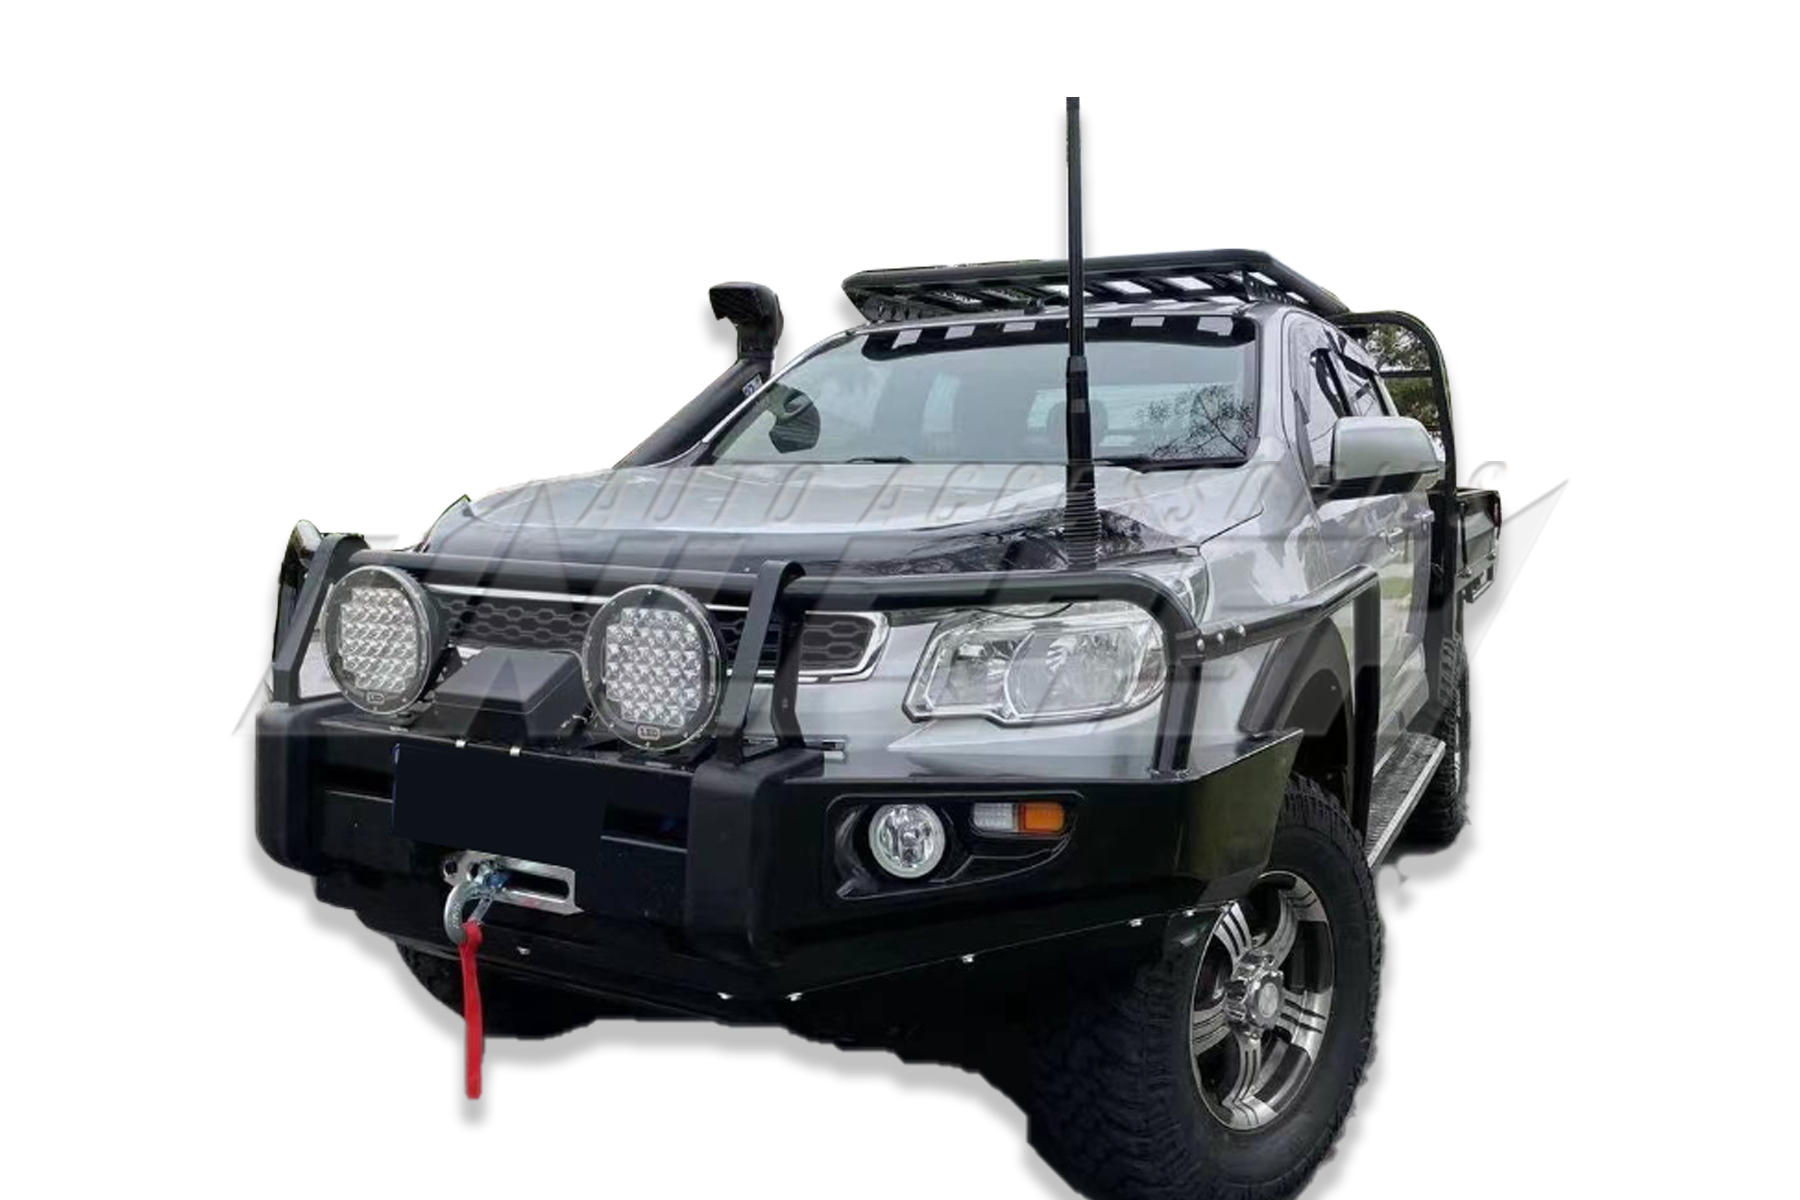 Triple Hoop Front Bumper Replacement Winch Bull bar for Holden Colorado 2012-2016